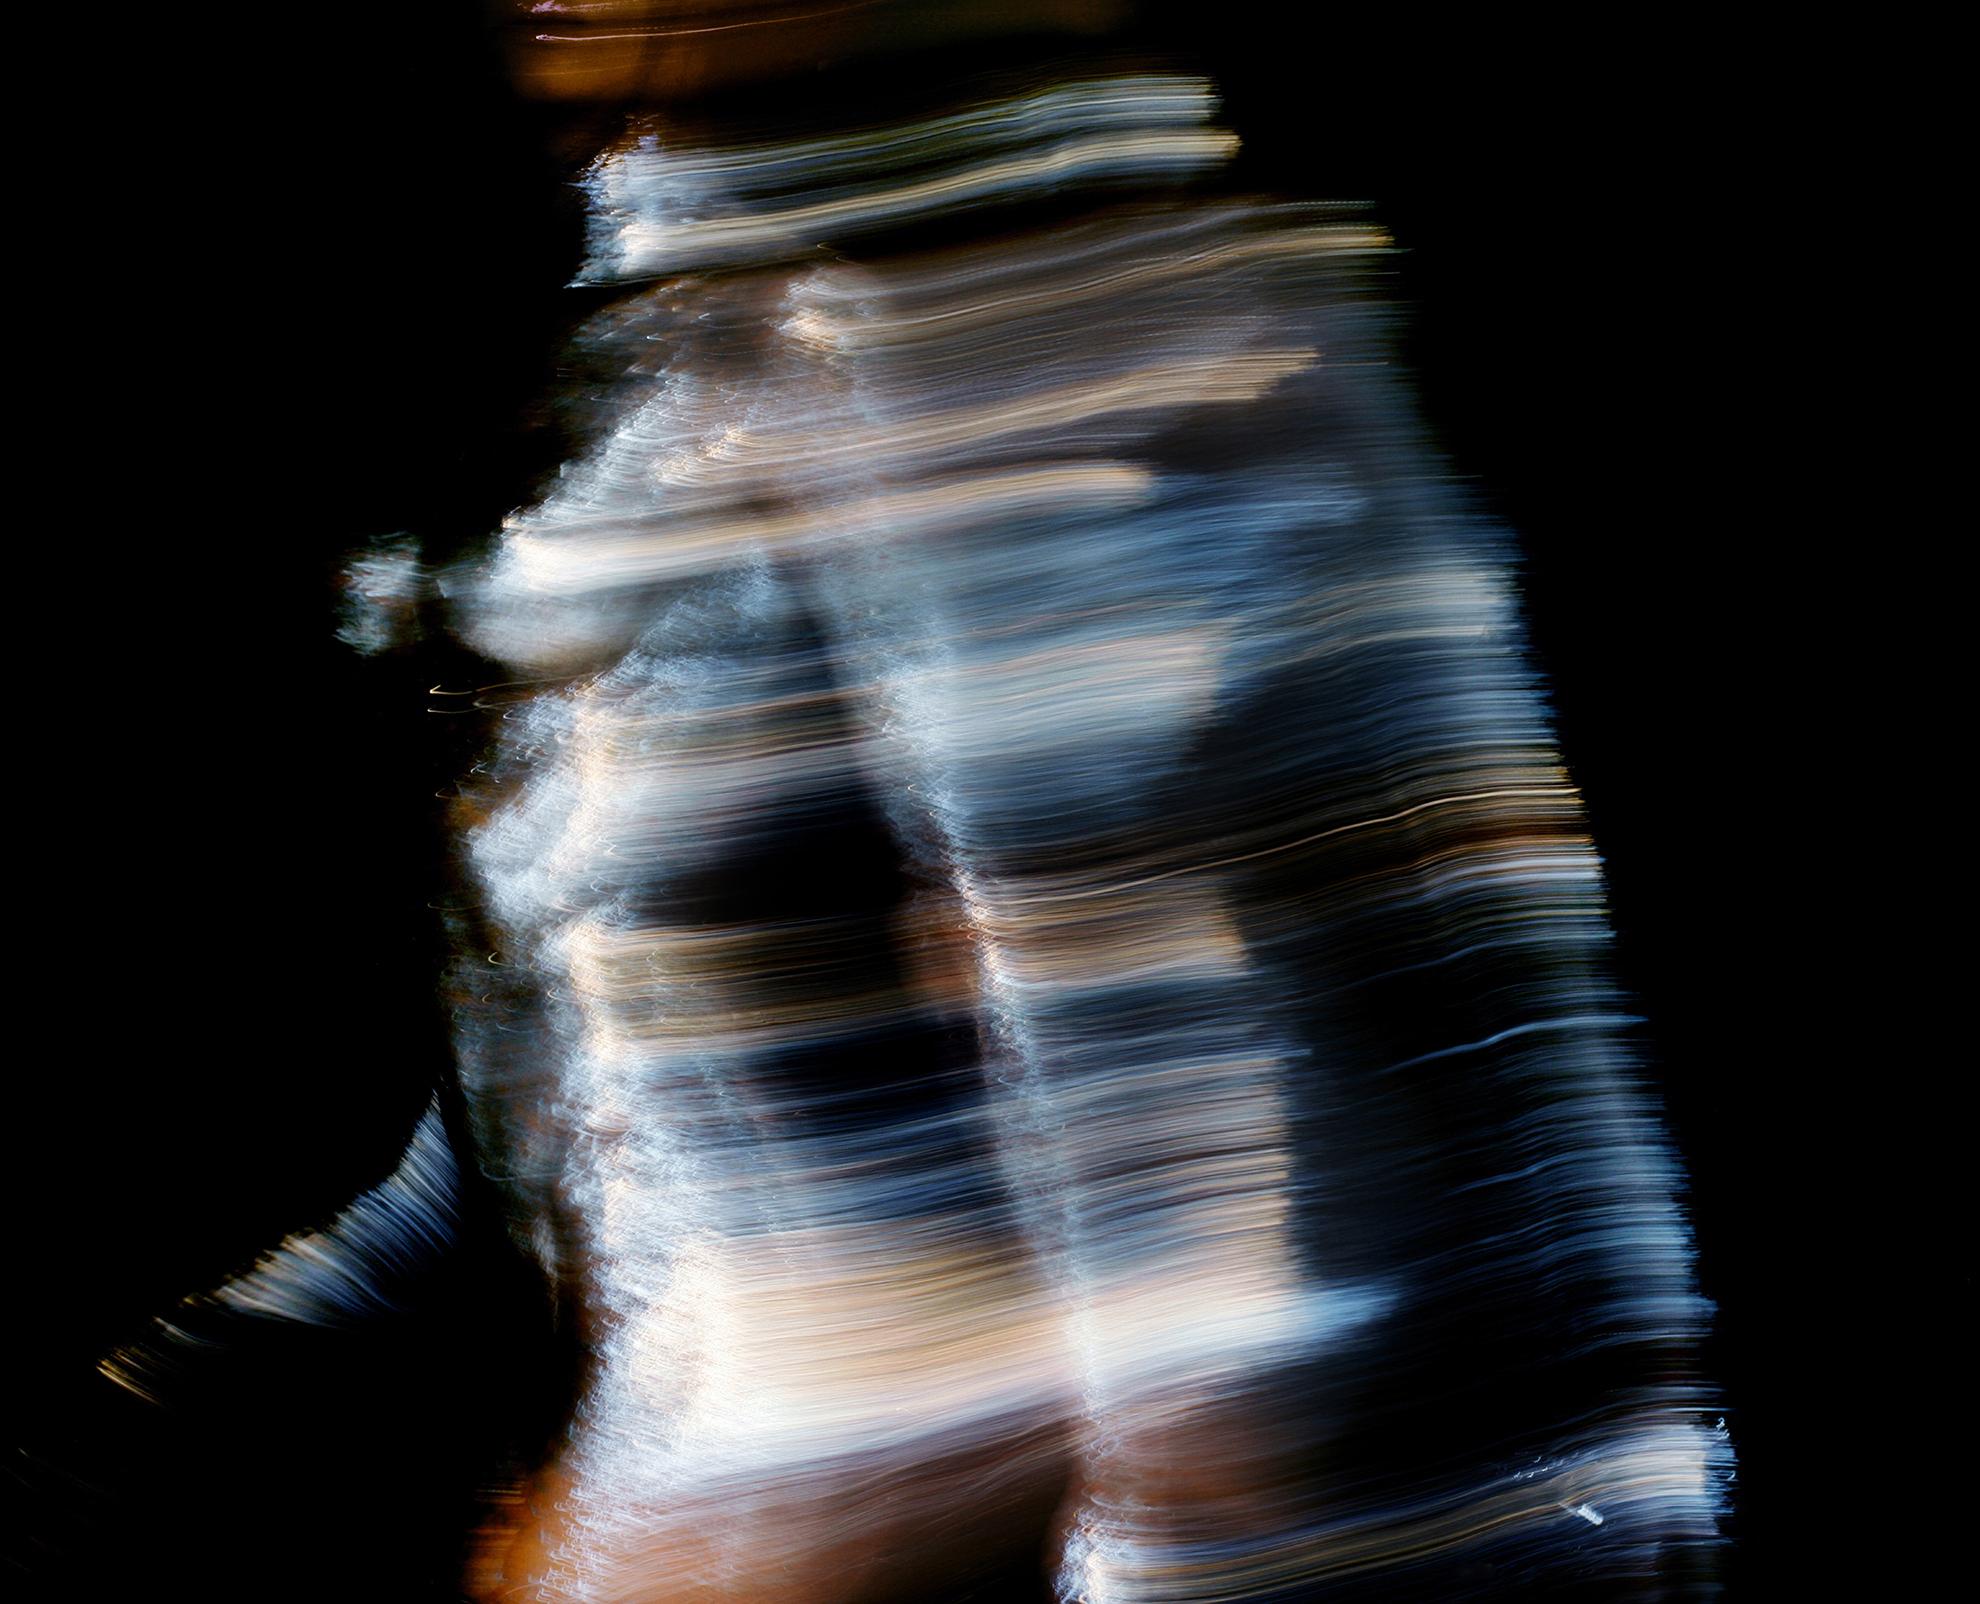 Roger Reist Black and White Photograph - Space Running Girl - Abstract Expressionist Art Photography